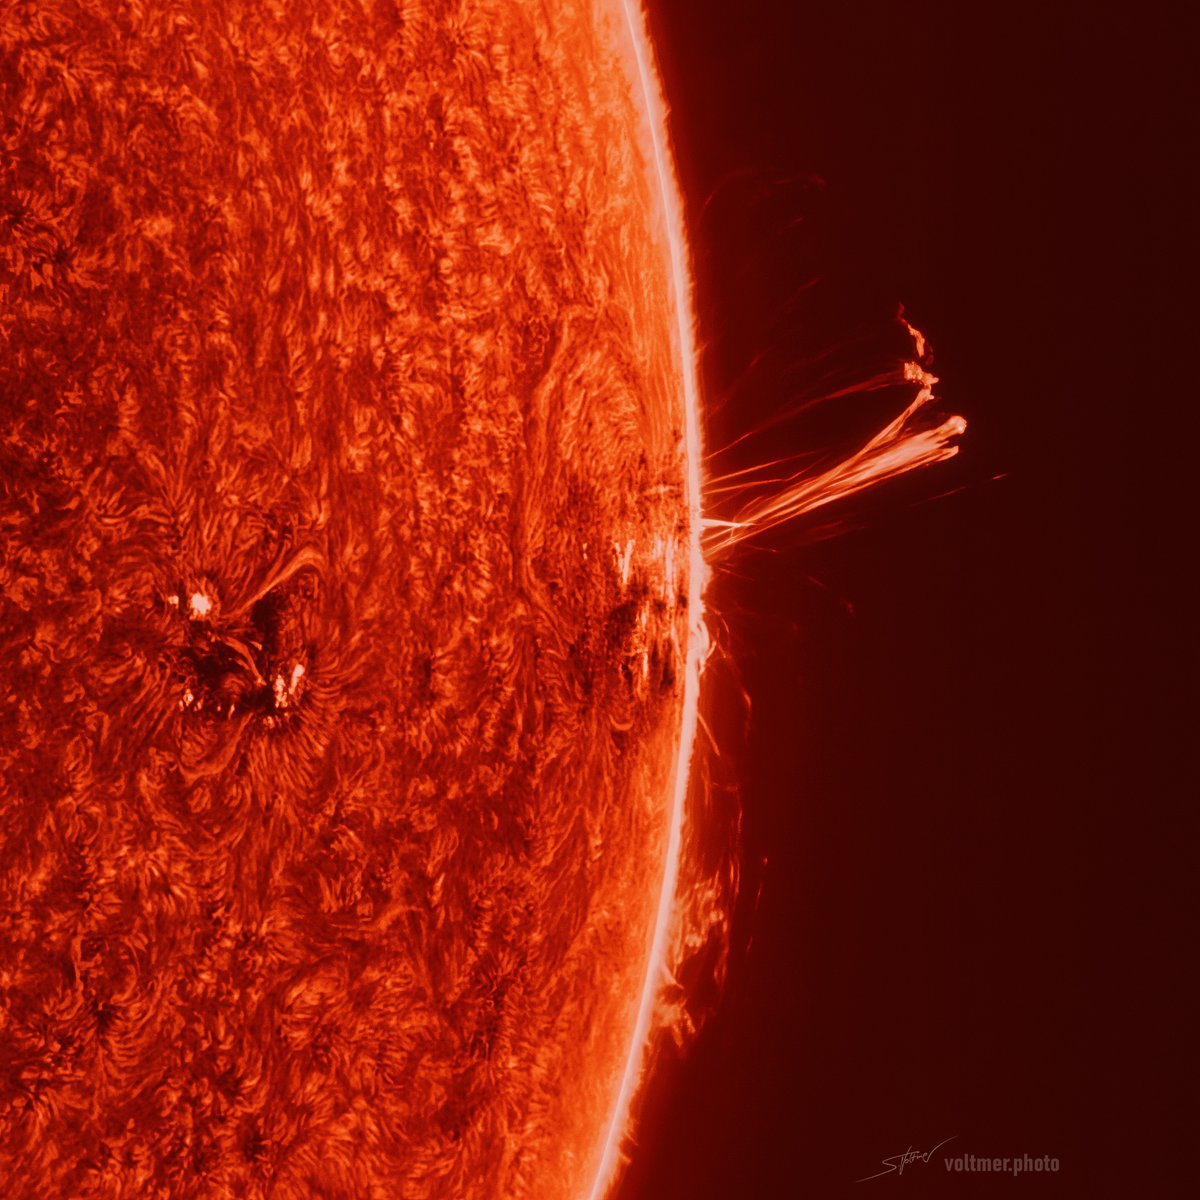 This eruption is going out from the giant sunspot group AR 3664 which produced vivid and bright Auroras even in sounthern regions of our planet. For this shot I used my Traveler telescope from Astro-Physics and a Quark filter system from DayStar. It was such an impressive view in